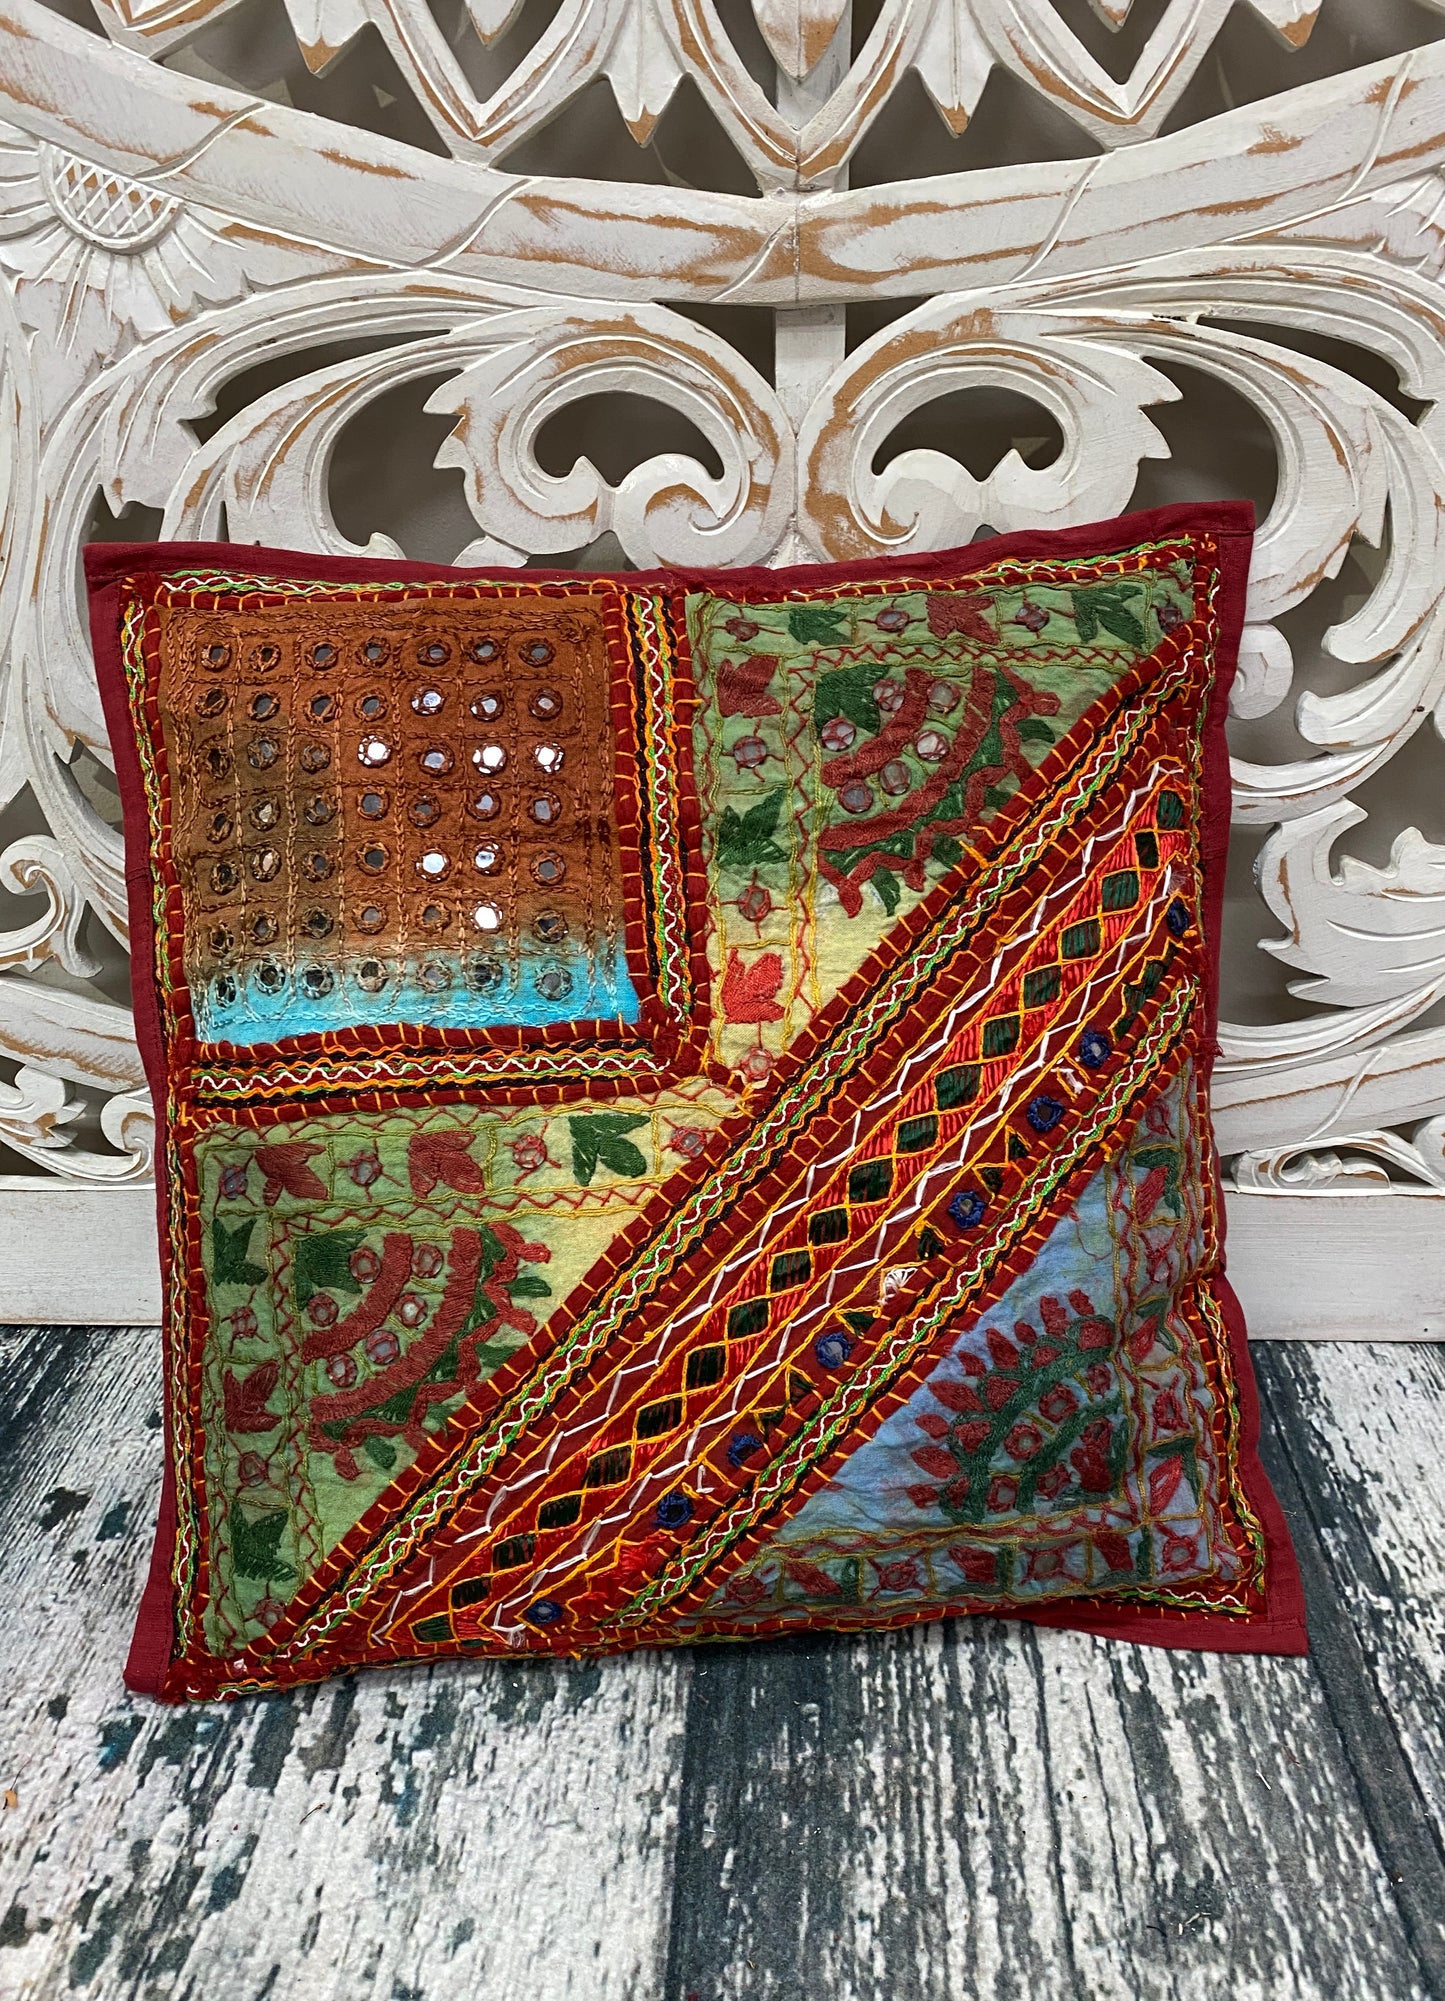 Rajasthani Embroidered Patchwork Throw Pillow Cases with Mirror Work - 3 Designs